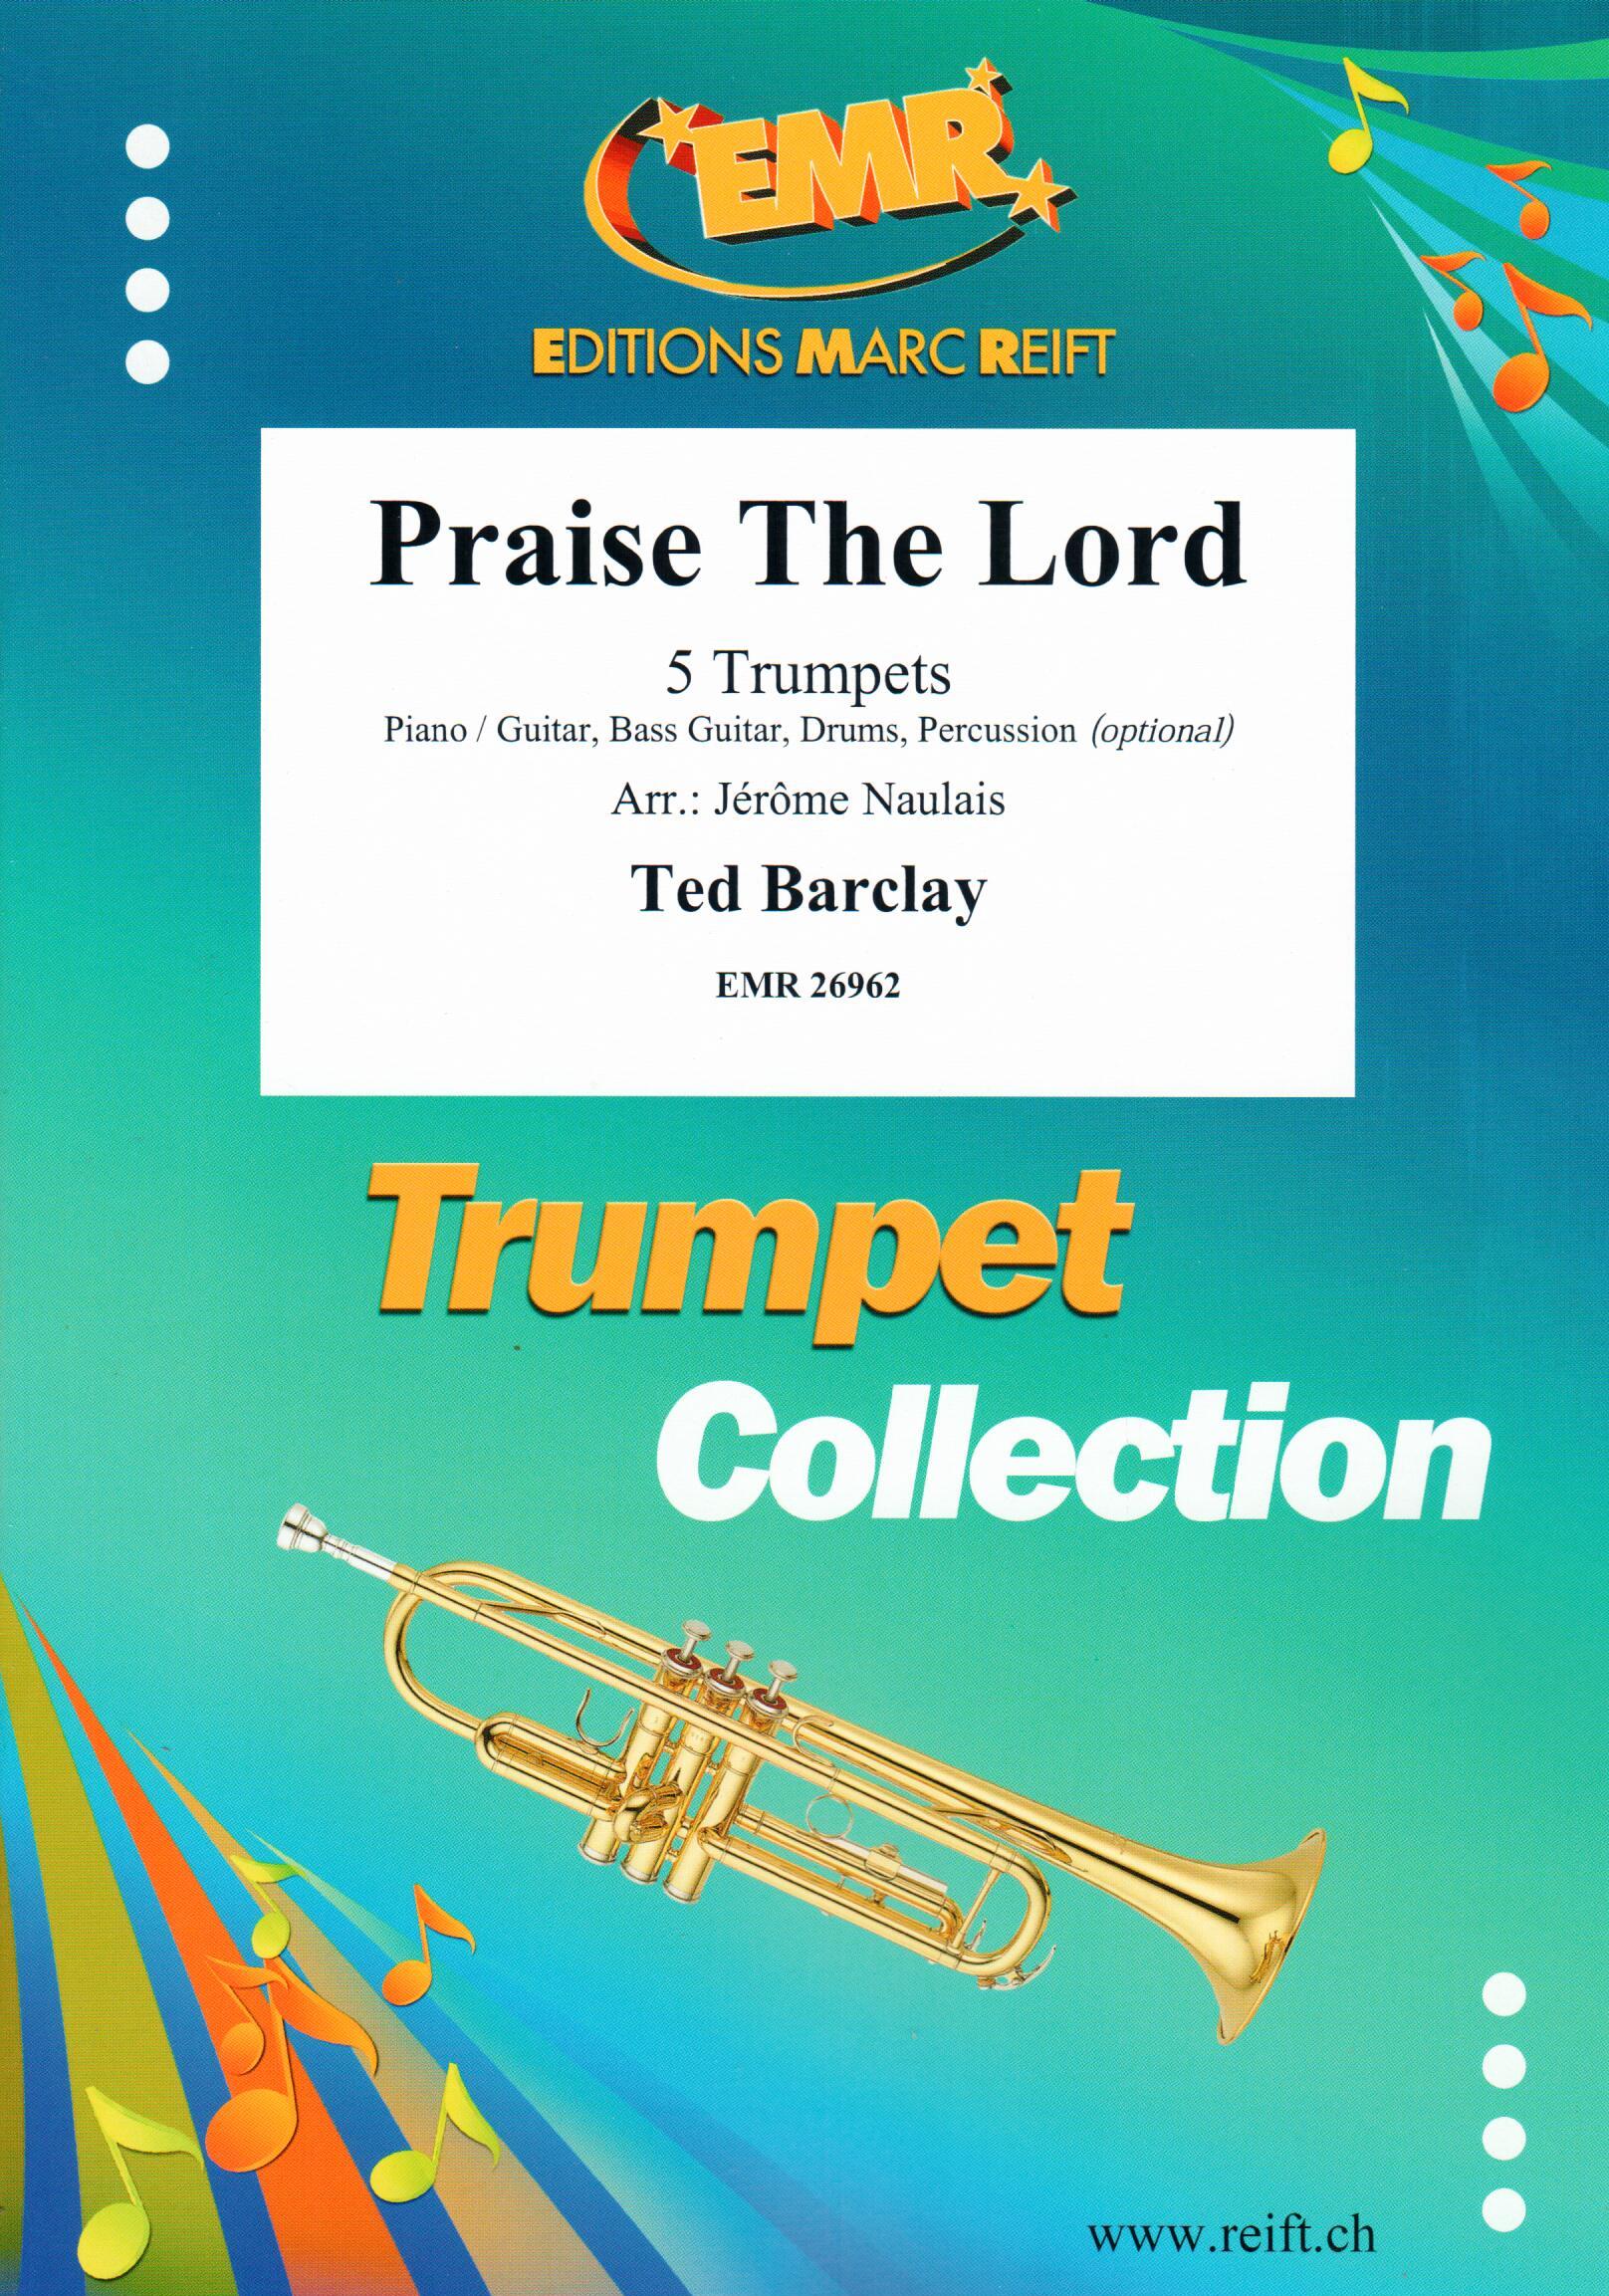 PRAISE THE LORD, SOLOS - B♭. Cornet/Trumpet with Piano